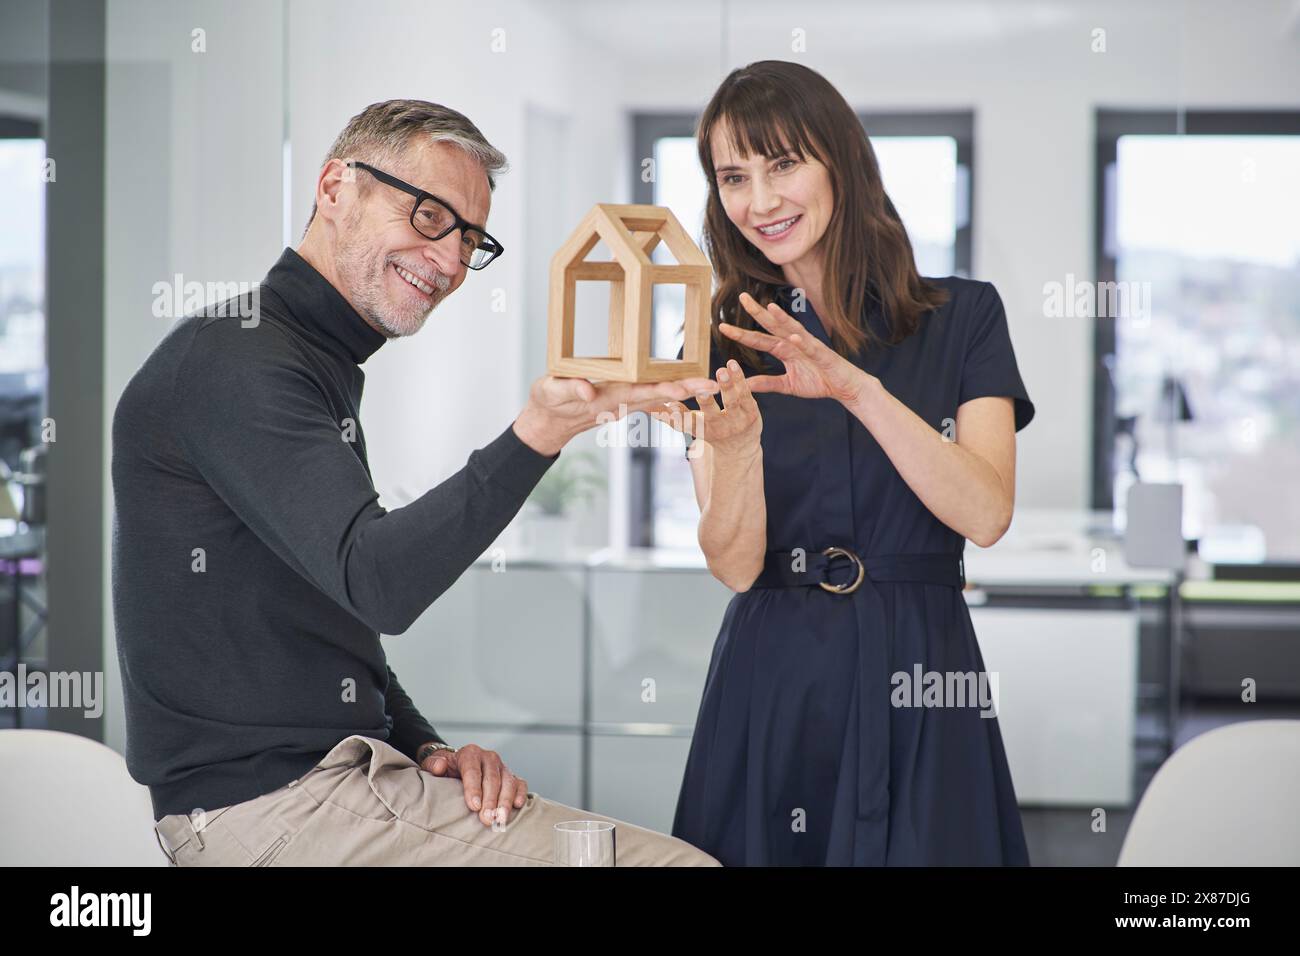 Two smiling architects examining model house in office Stock Photo